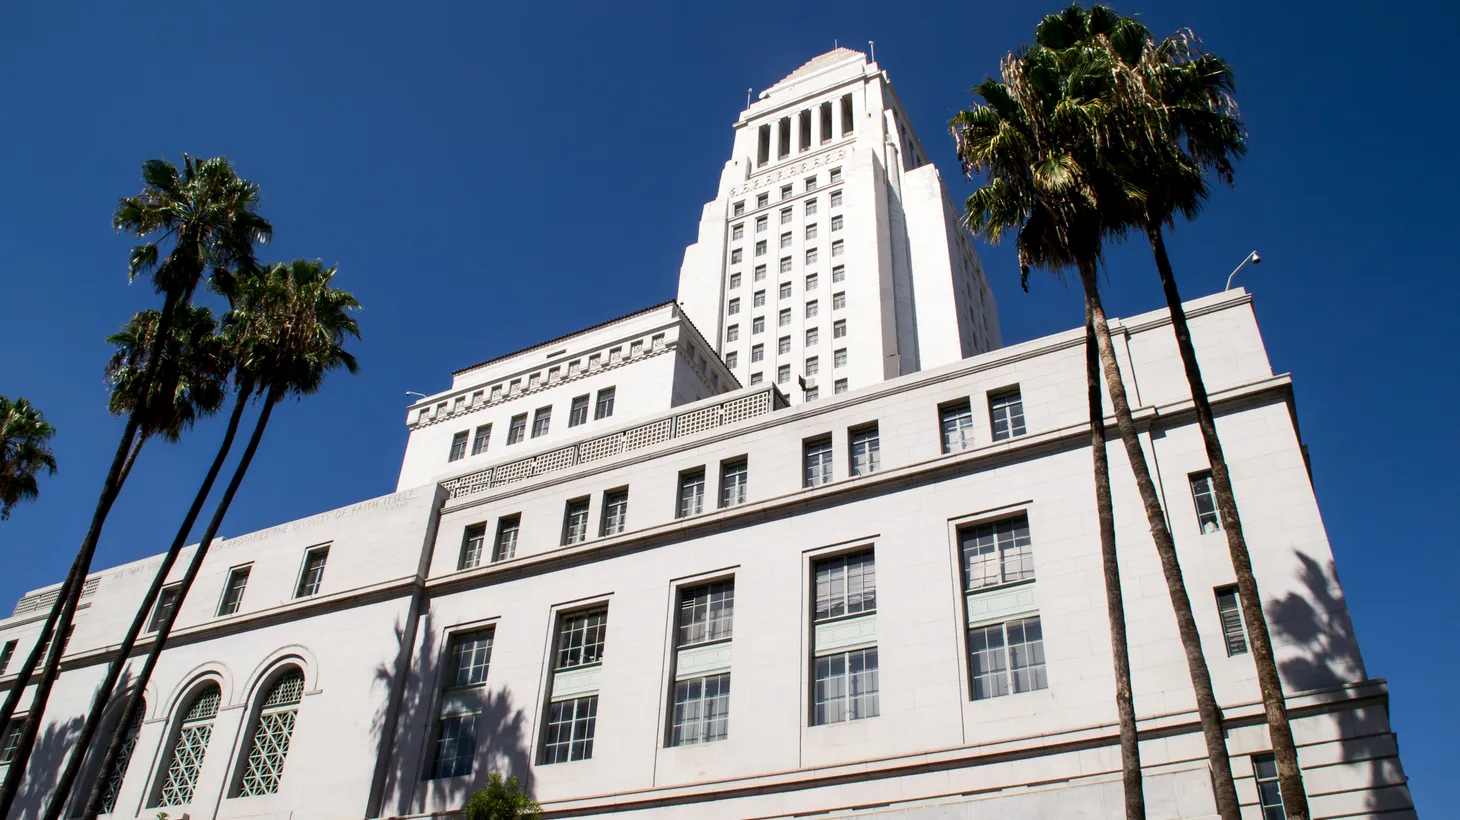 Who will take over the mayor’s office at LA City Hall? The mayoral race is heating up as candidates participated in their first live TV debate on February 22.